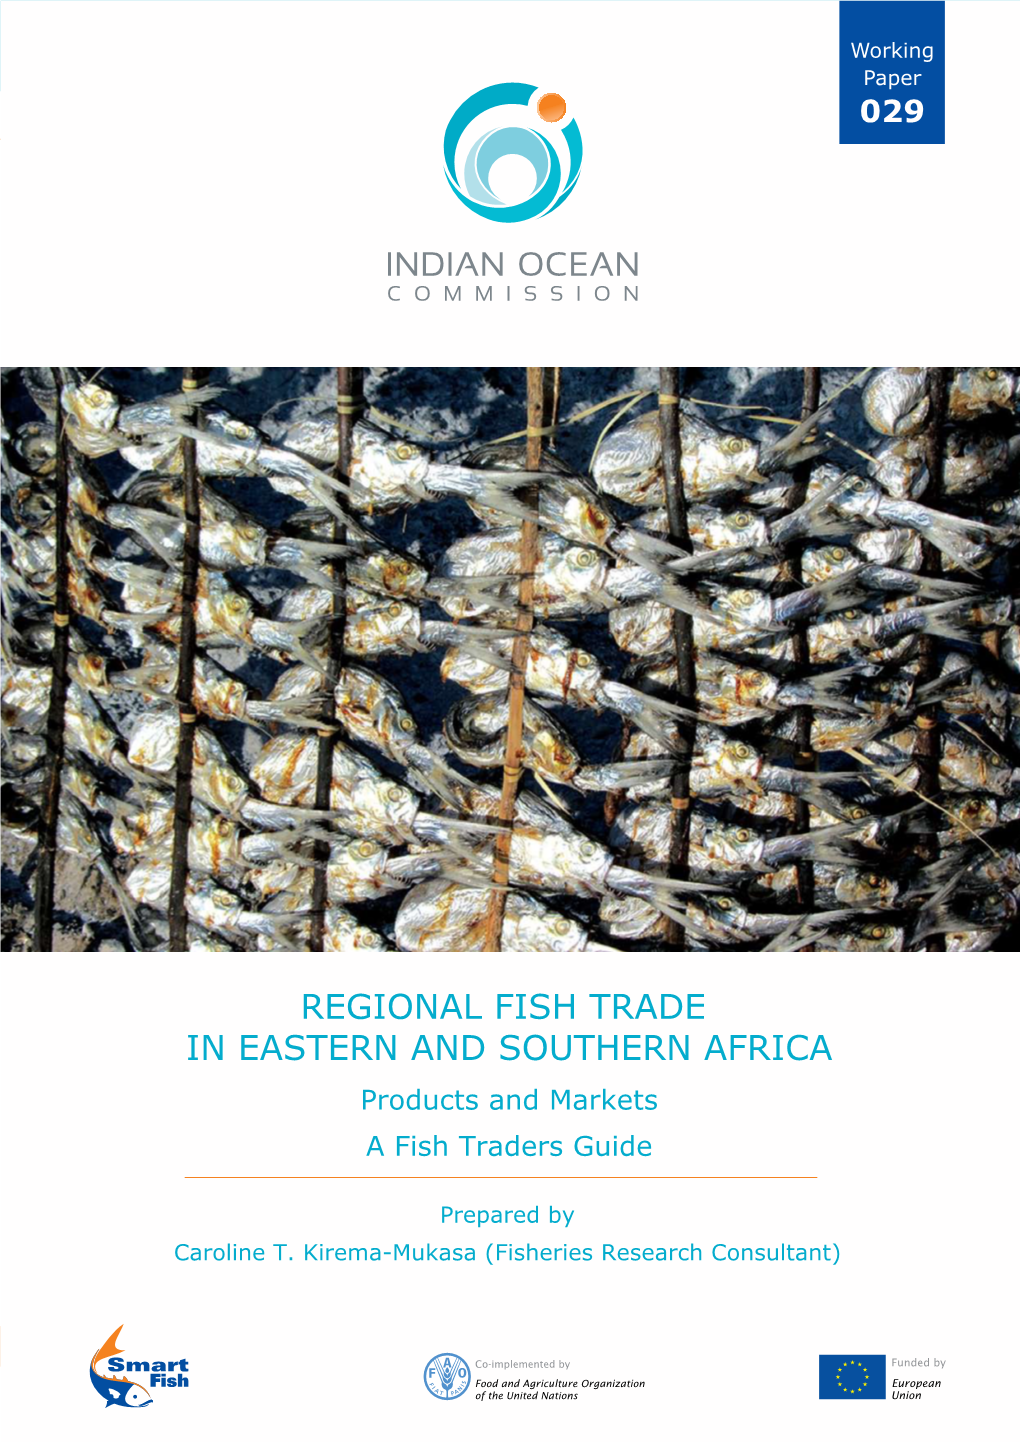 1 Regional Fish Trade in Eastern and Southern Africa